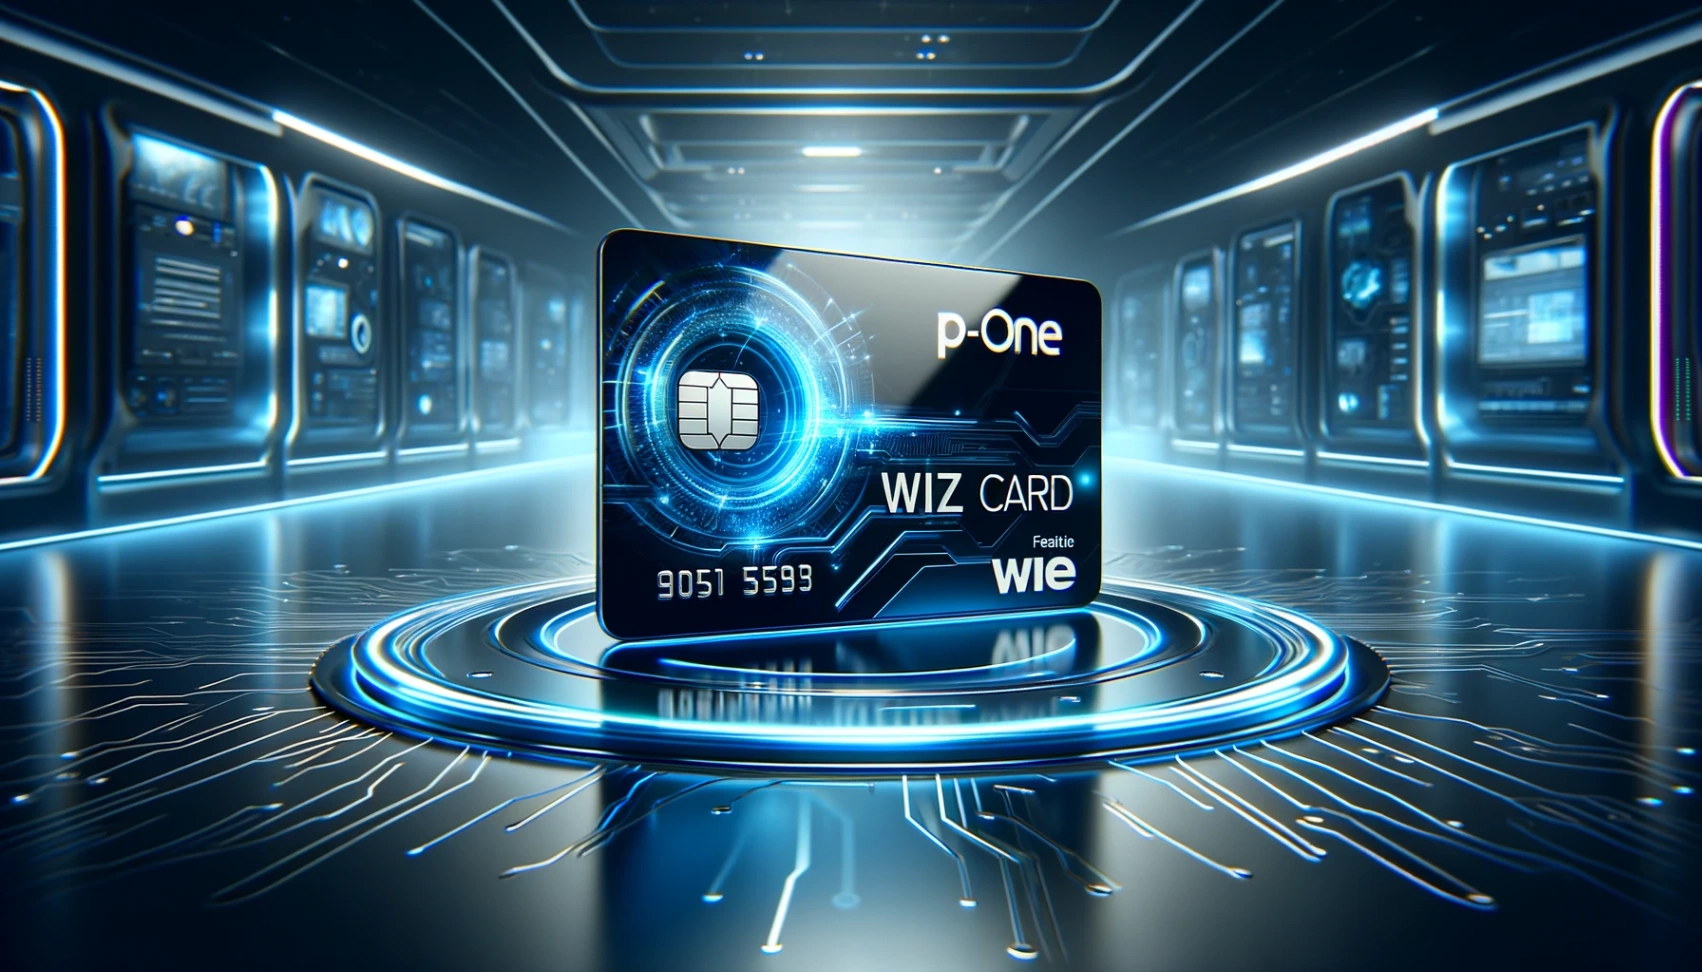 Learn How to Easily Apply for P-One Wiz Card